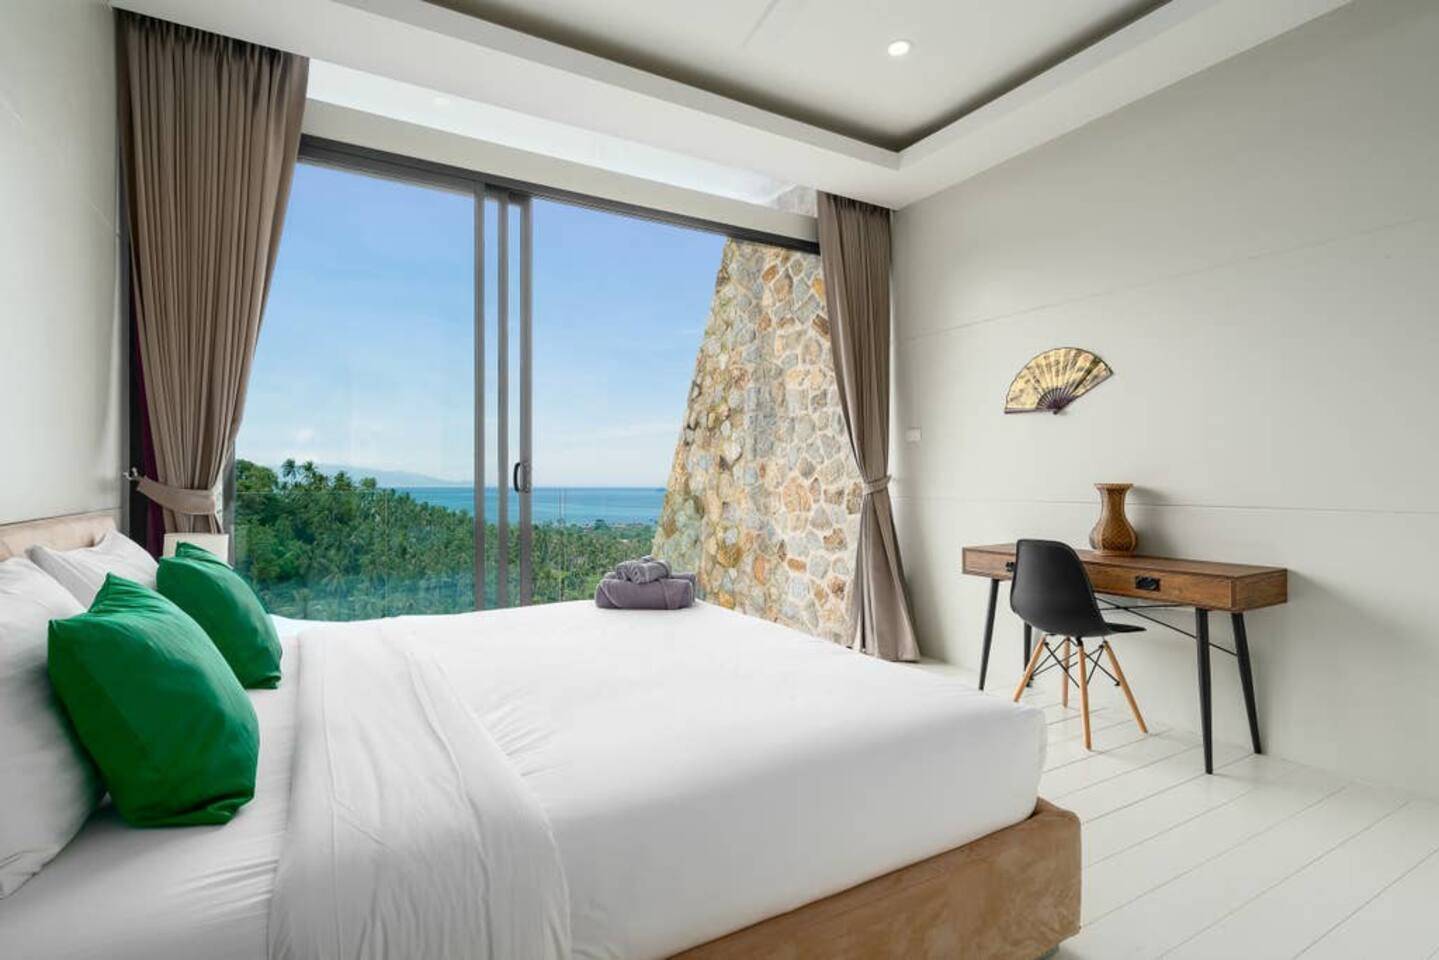 2 bedrooms private pool apartment for sale in Bophut Hills, Koh Samui. : 2 bedrooms private pool apartment for sale in Bophut Hills, Koh Samui. 